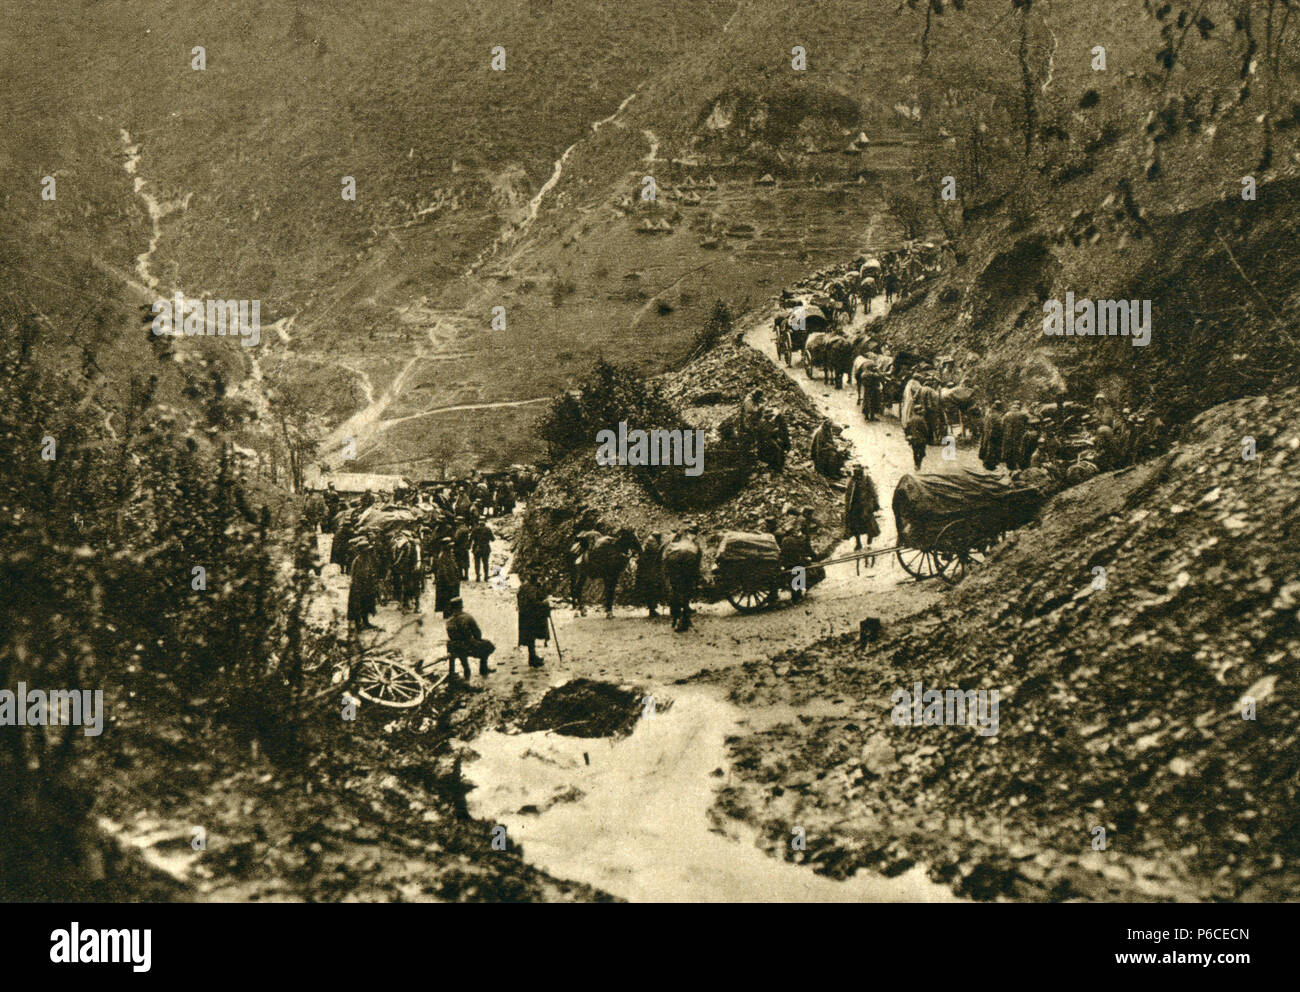 mountain road, offensive, German soldiers, eastern front, ww1, wwi, world war one Stock Photo